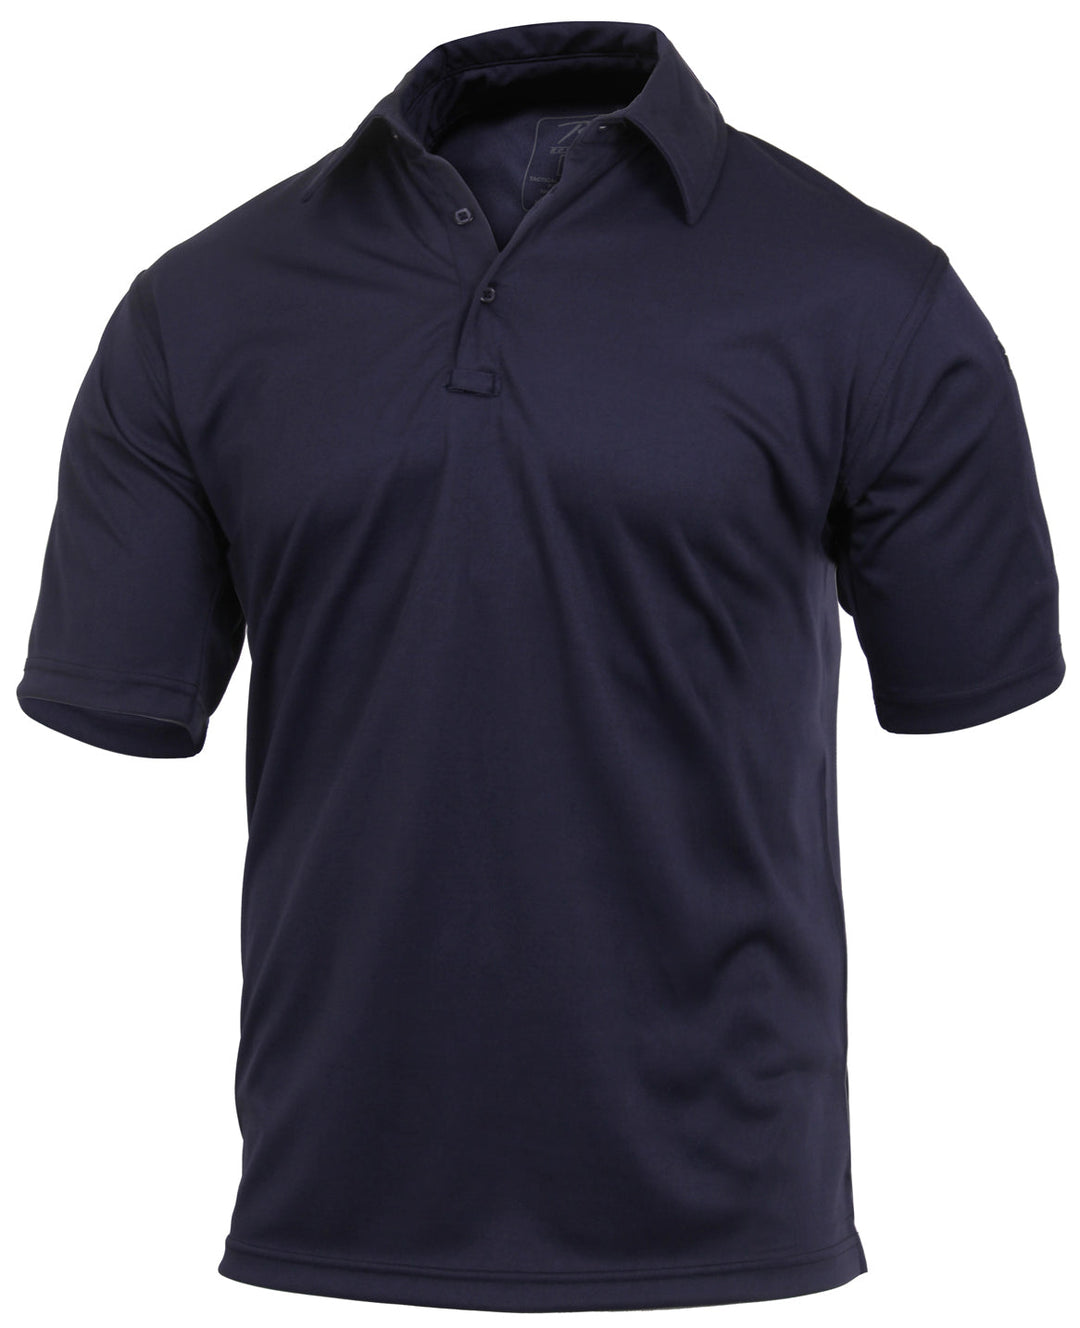 Tactical Performance Polo Shirt by Rotcho